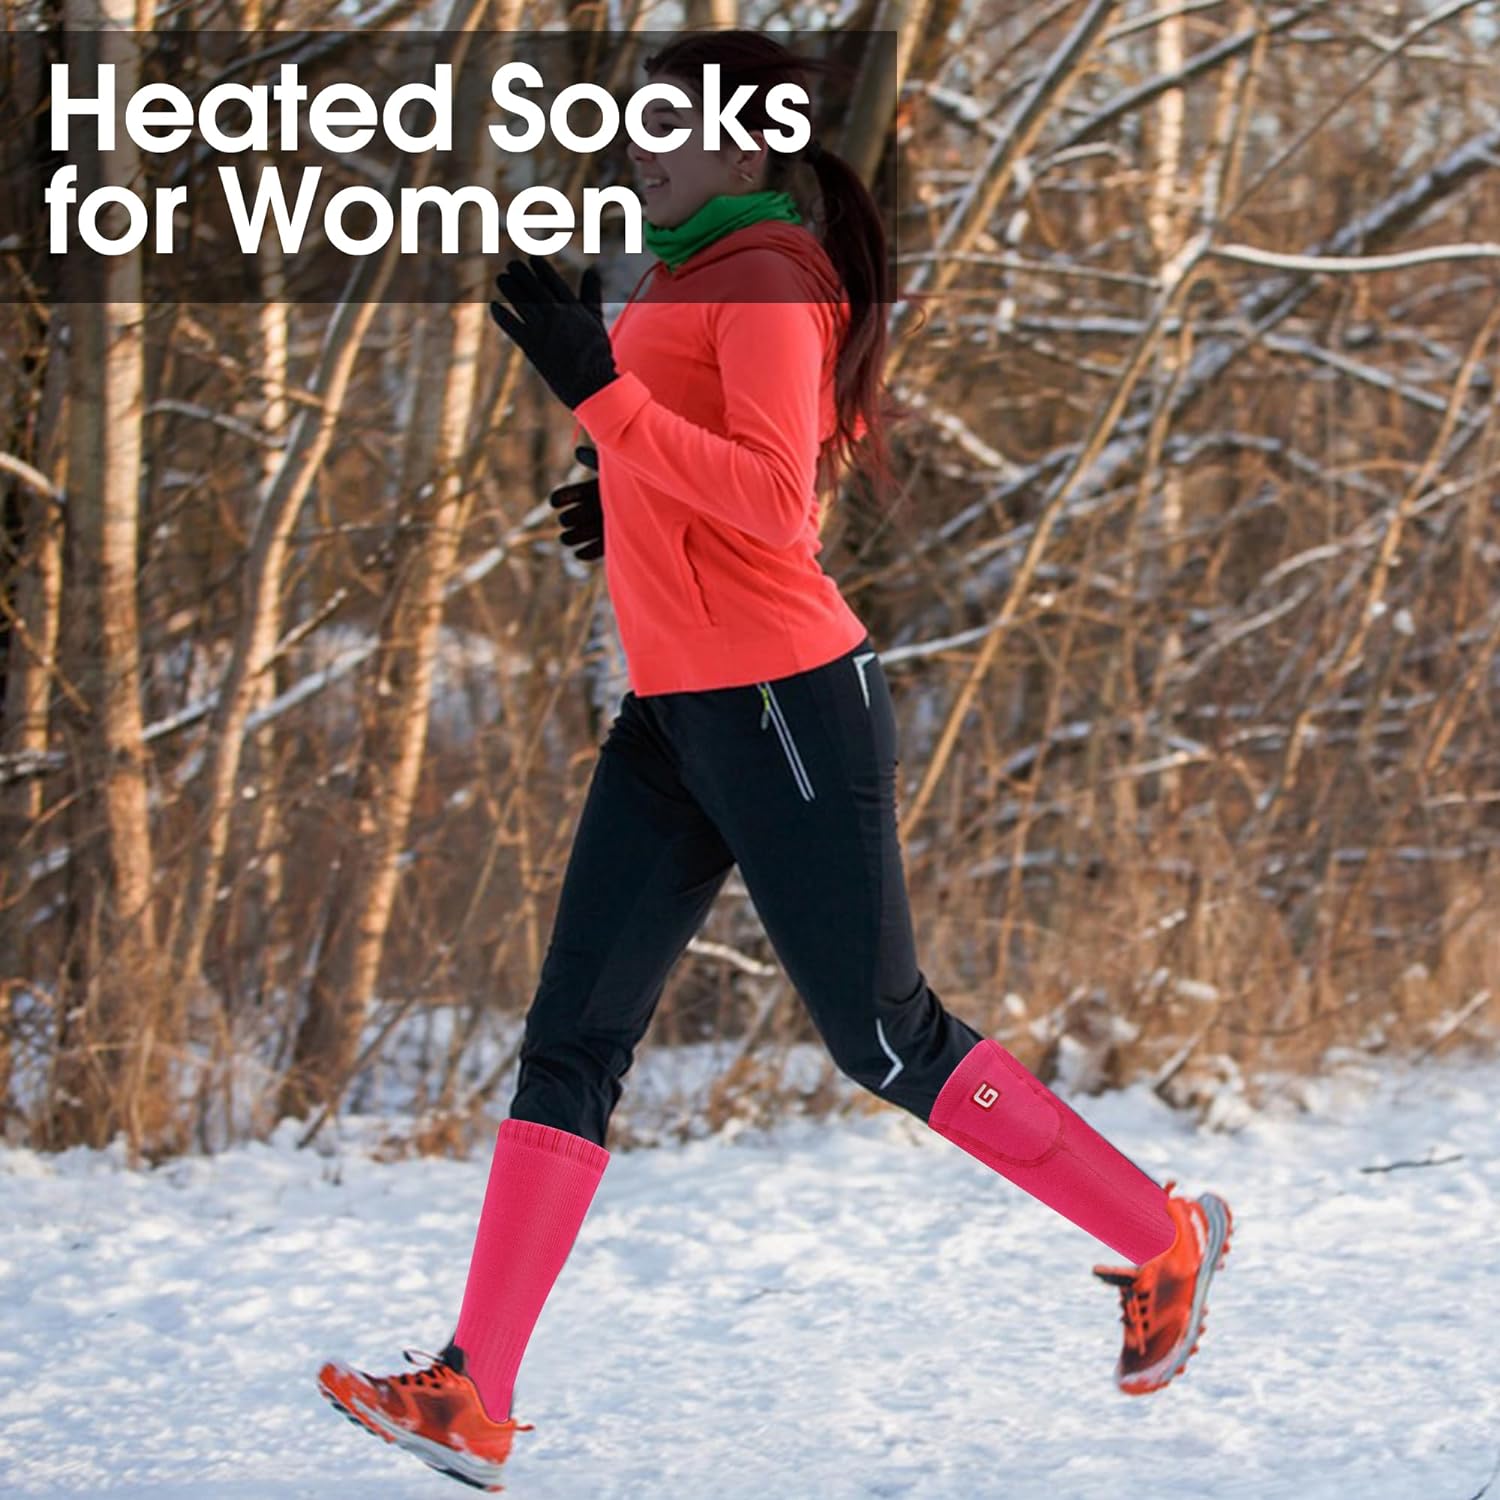 GEMSTONEGO Heated Socks for Women Electric Rechargeable Battery Heated Socks,Winter Cotton Warm Heated Socks for Arthritis,Machine Washable Electric Thermal Heated Socks for Hiking Skiing Camping